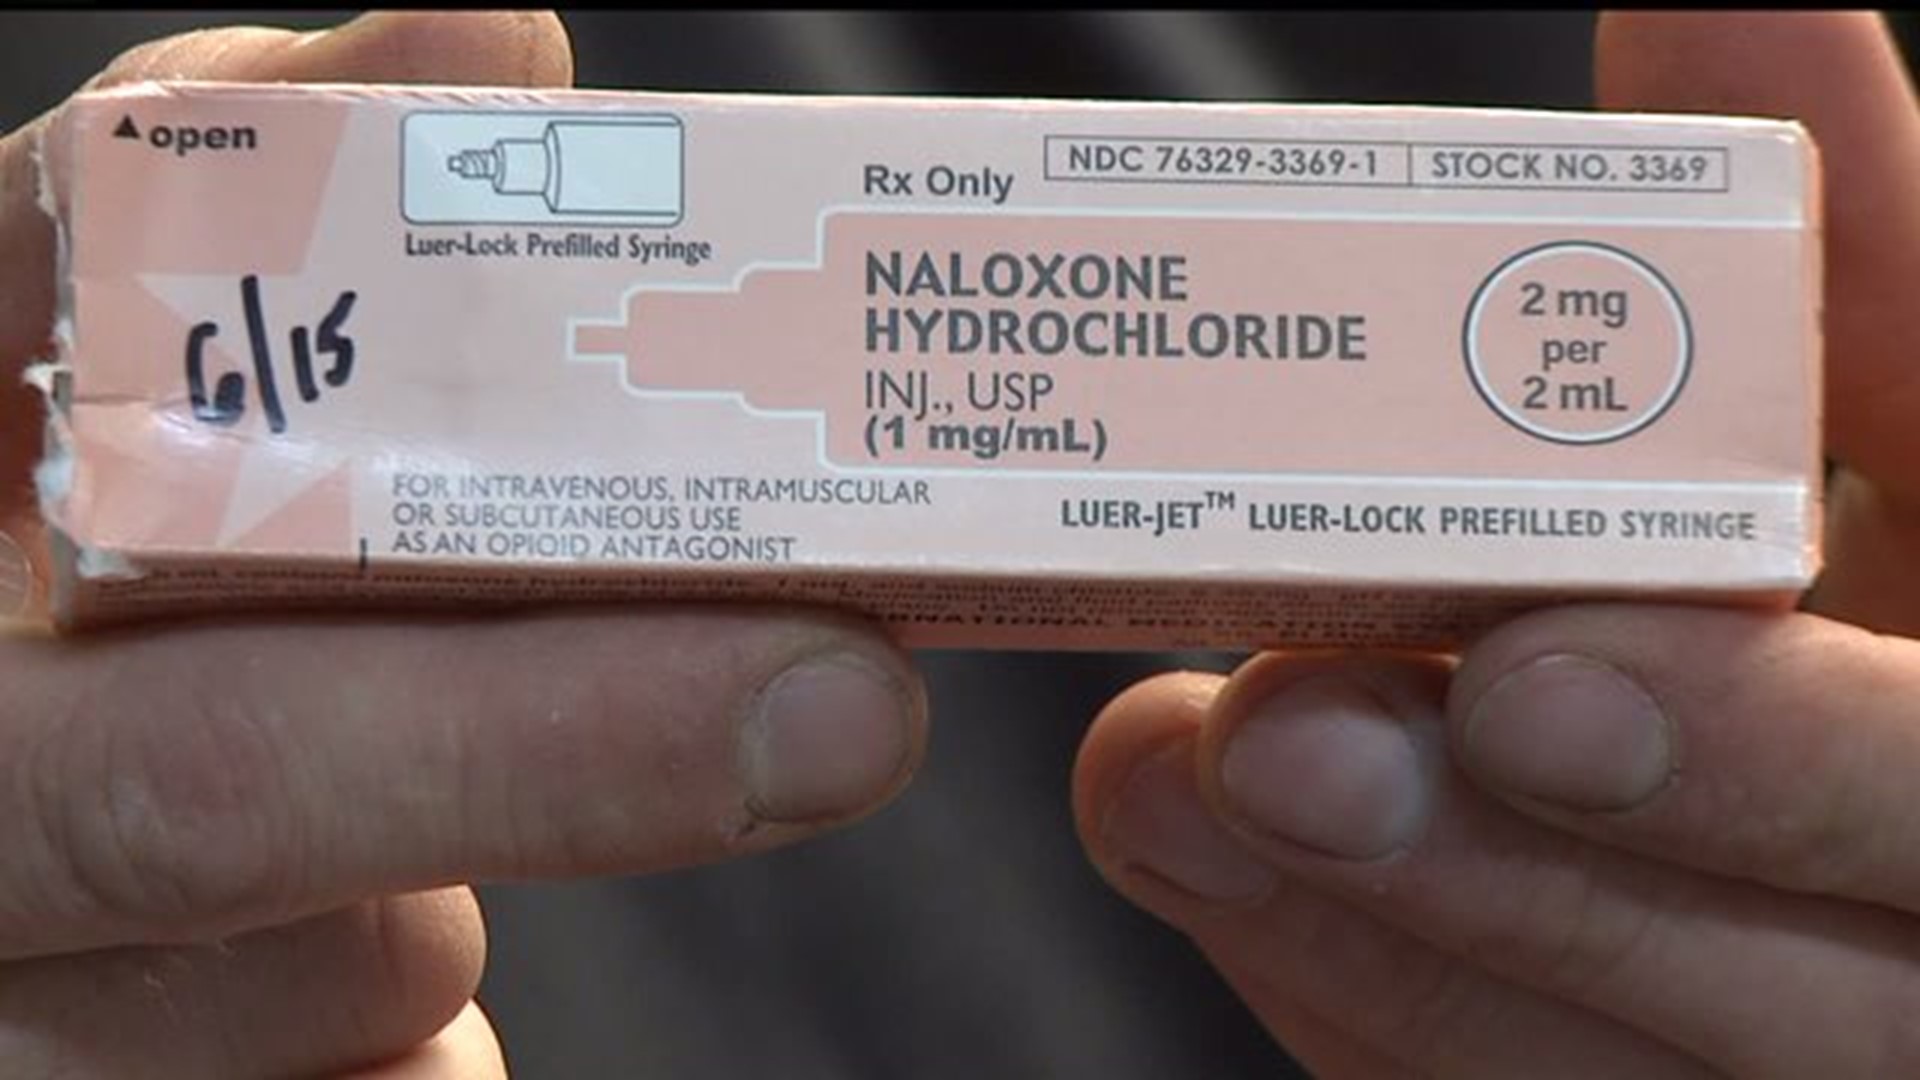 Progress slow with life-saving drug that fights Heroin overdoses